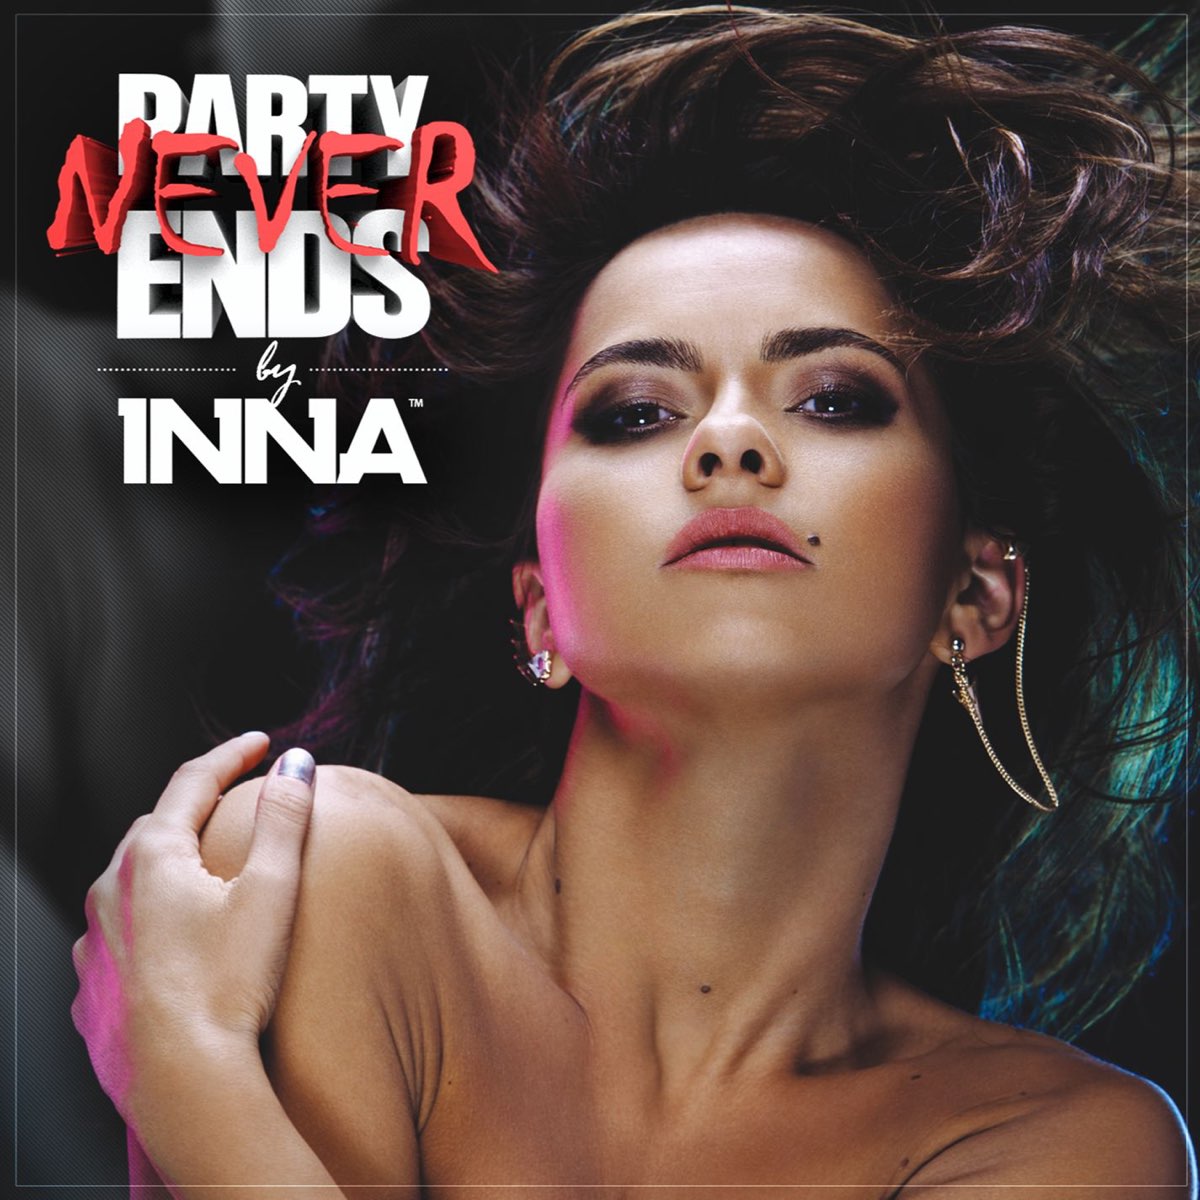 ‎Party Never Ends by Inna on Apple Music